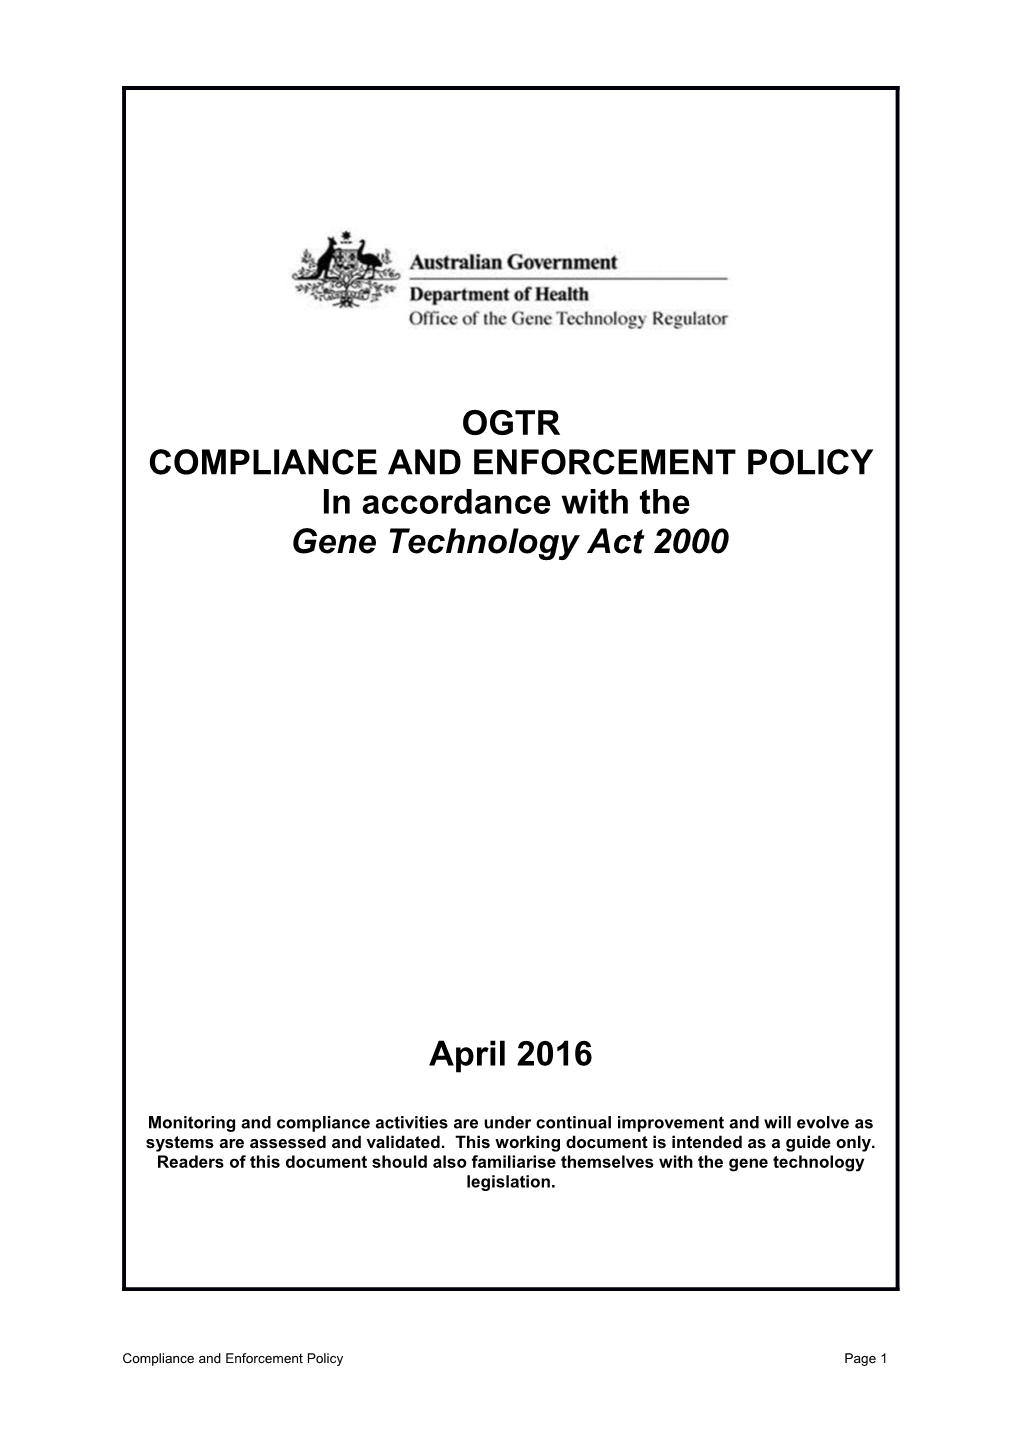 Compliance and Enforcement Policy